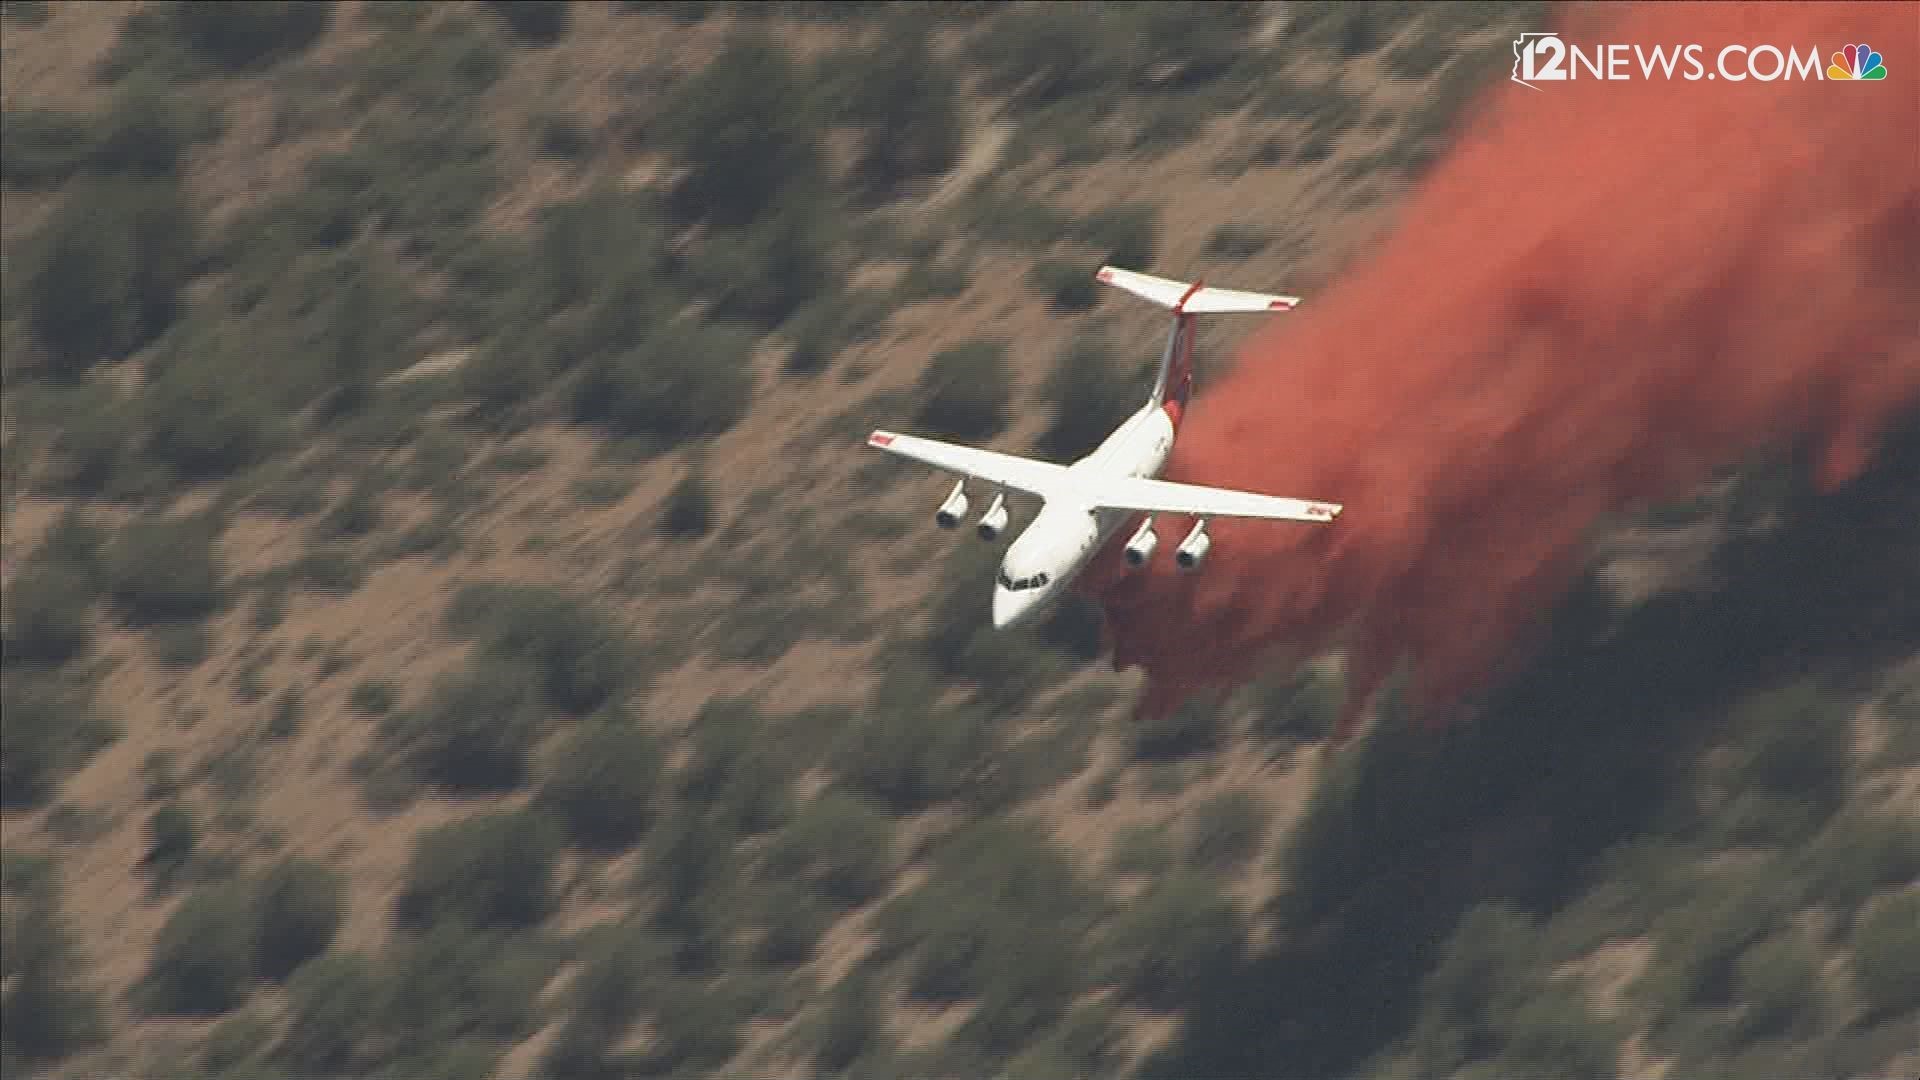 The Cellar Fire is currently burning nearly 7,000 acres south of Prescott, officials say. Sky 12 was over the scene of the blaze Wednesday morning.